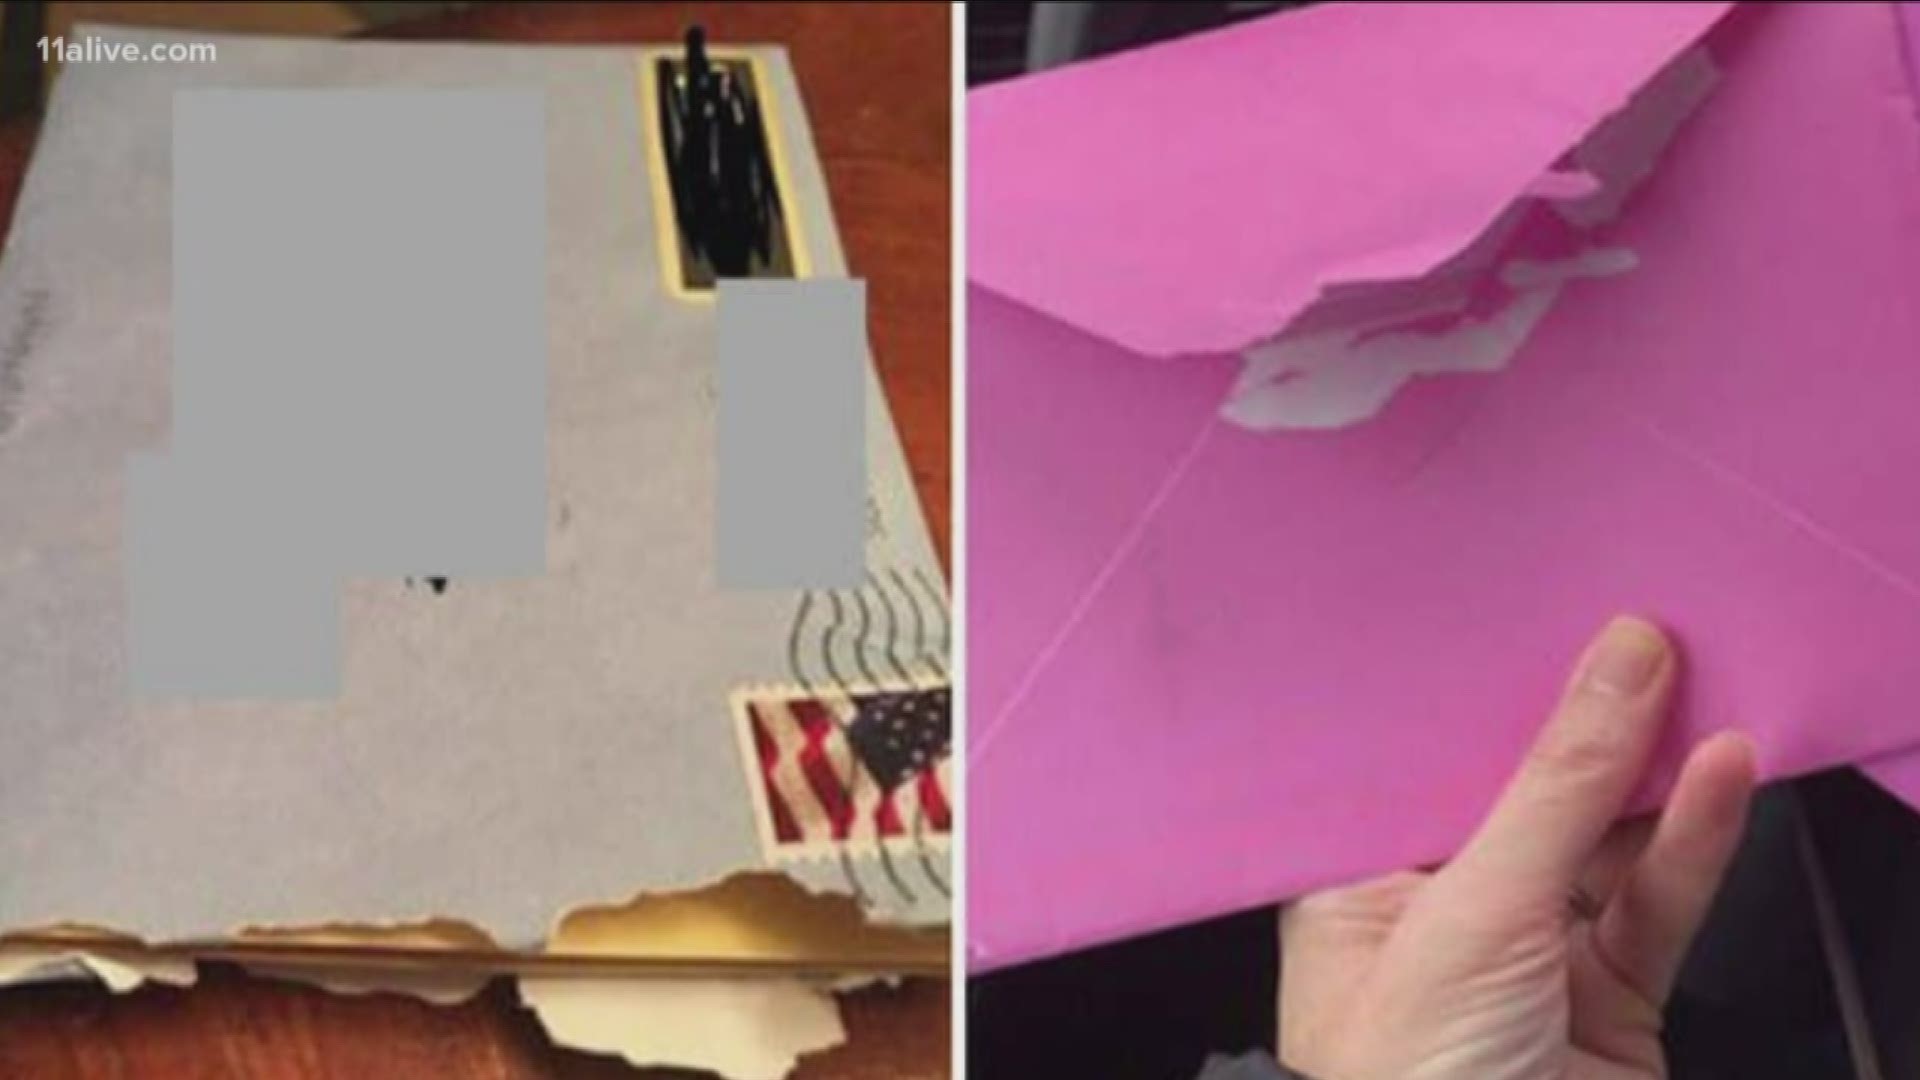 They said the opened mail contained gift cards, checks and cash -- which is removed from inside the mailings -- then placed back inside the envelope and delivered.